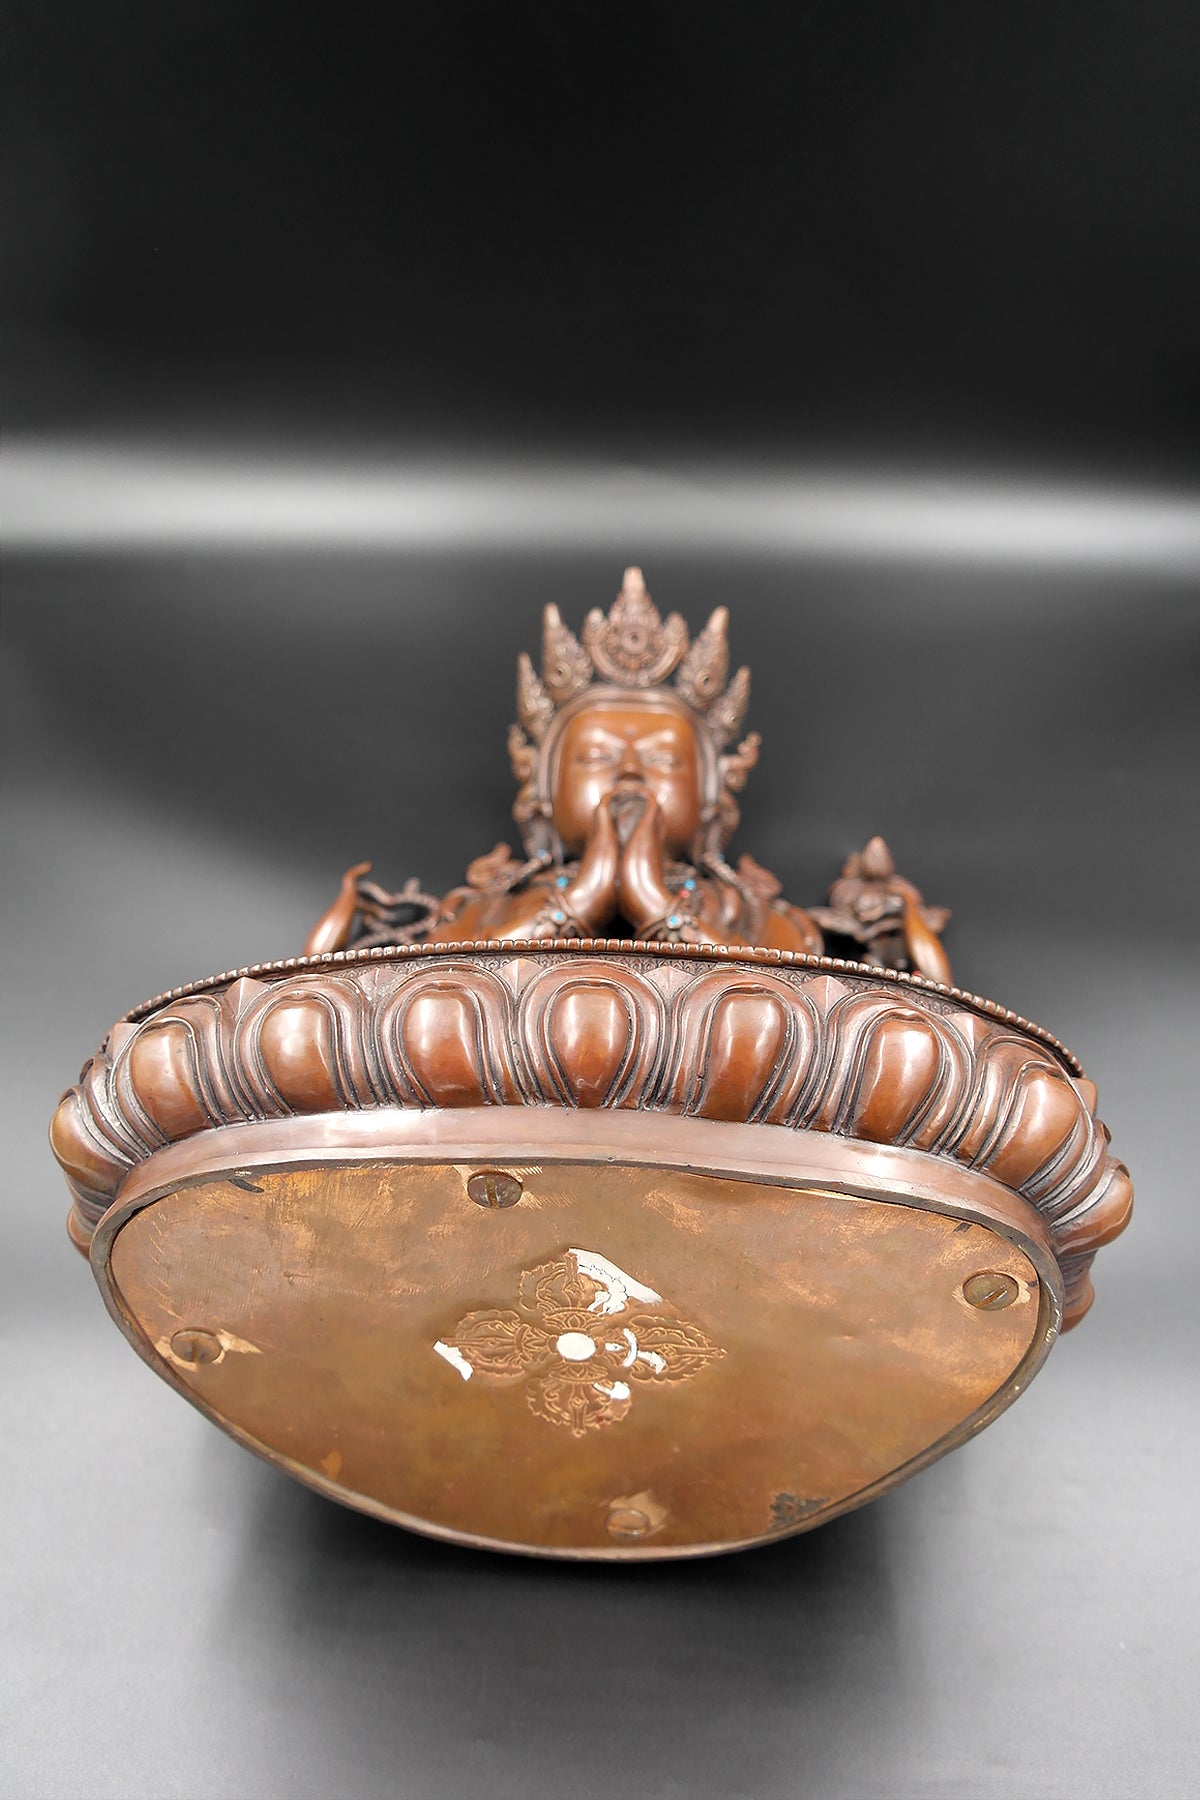 Fully Copper Oxidized Chenrezig Statue Top quality, 15"